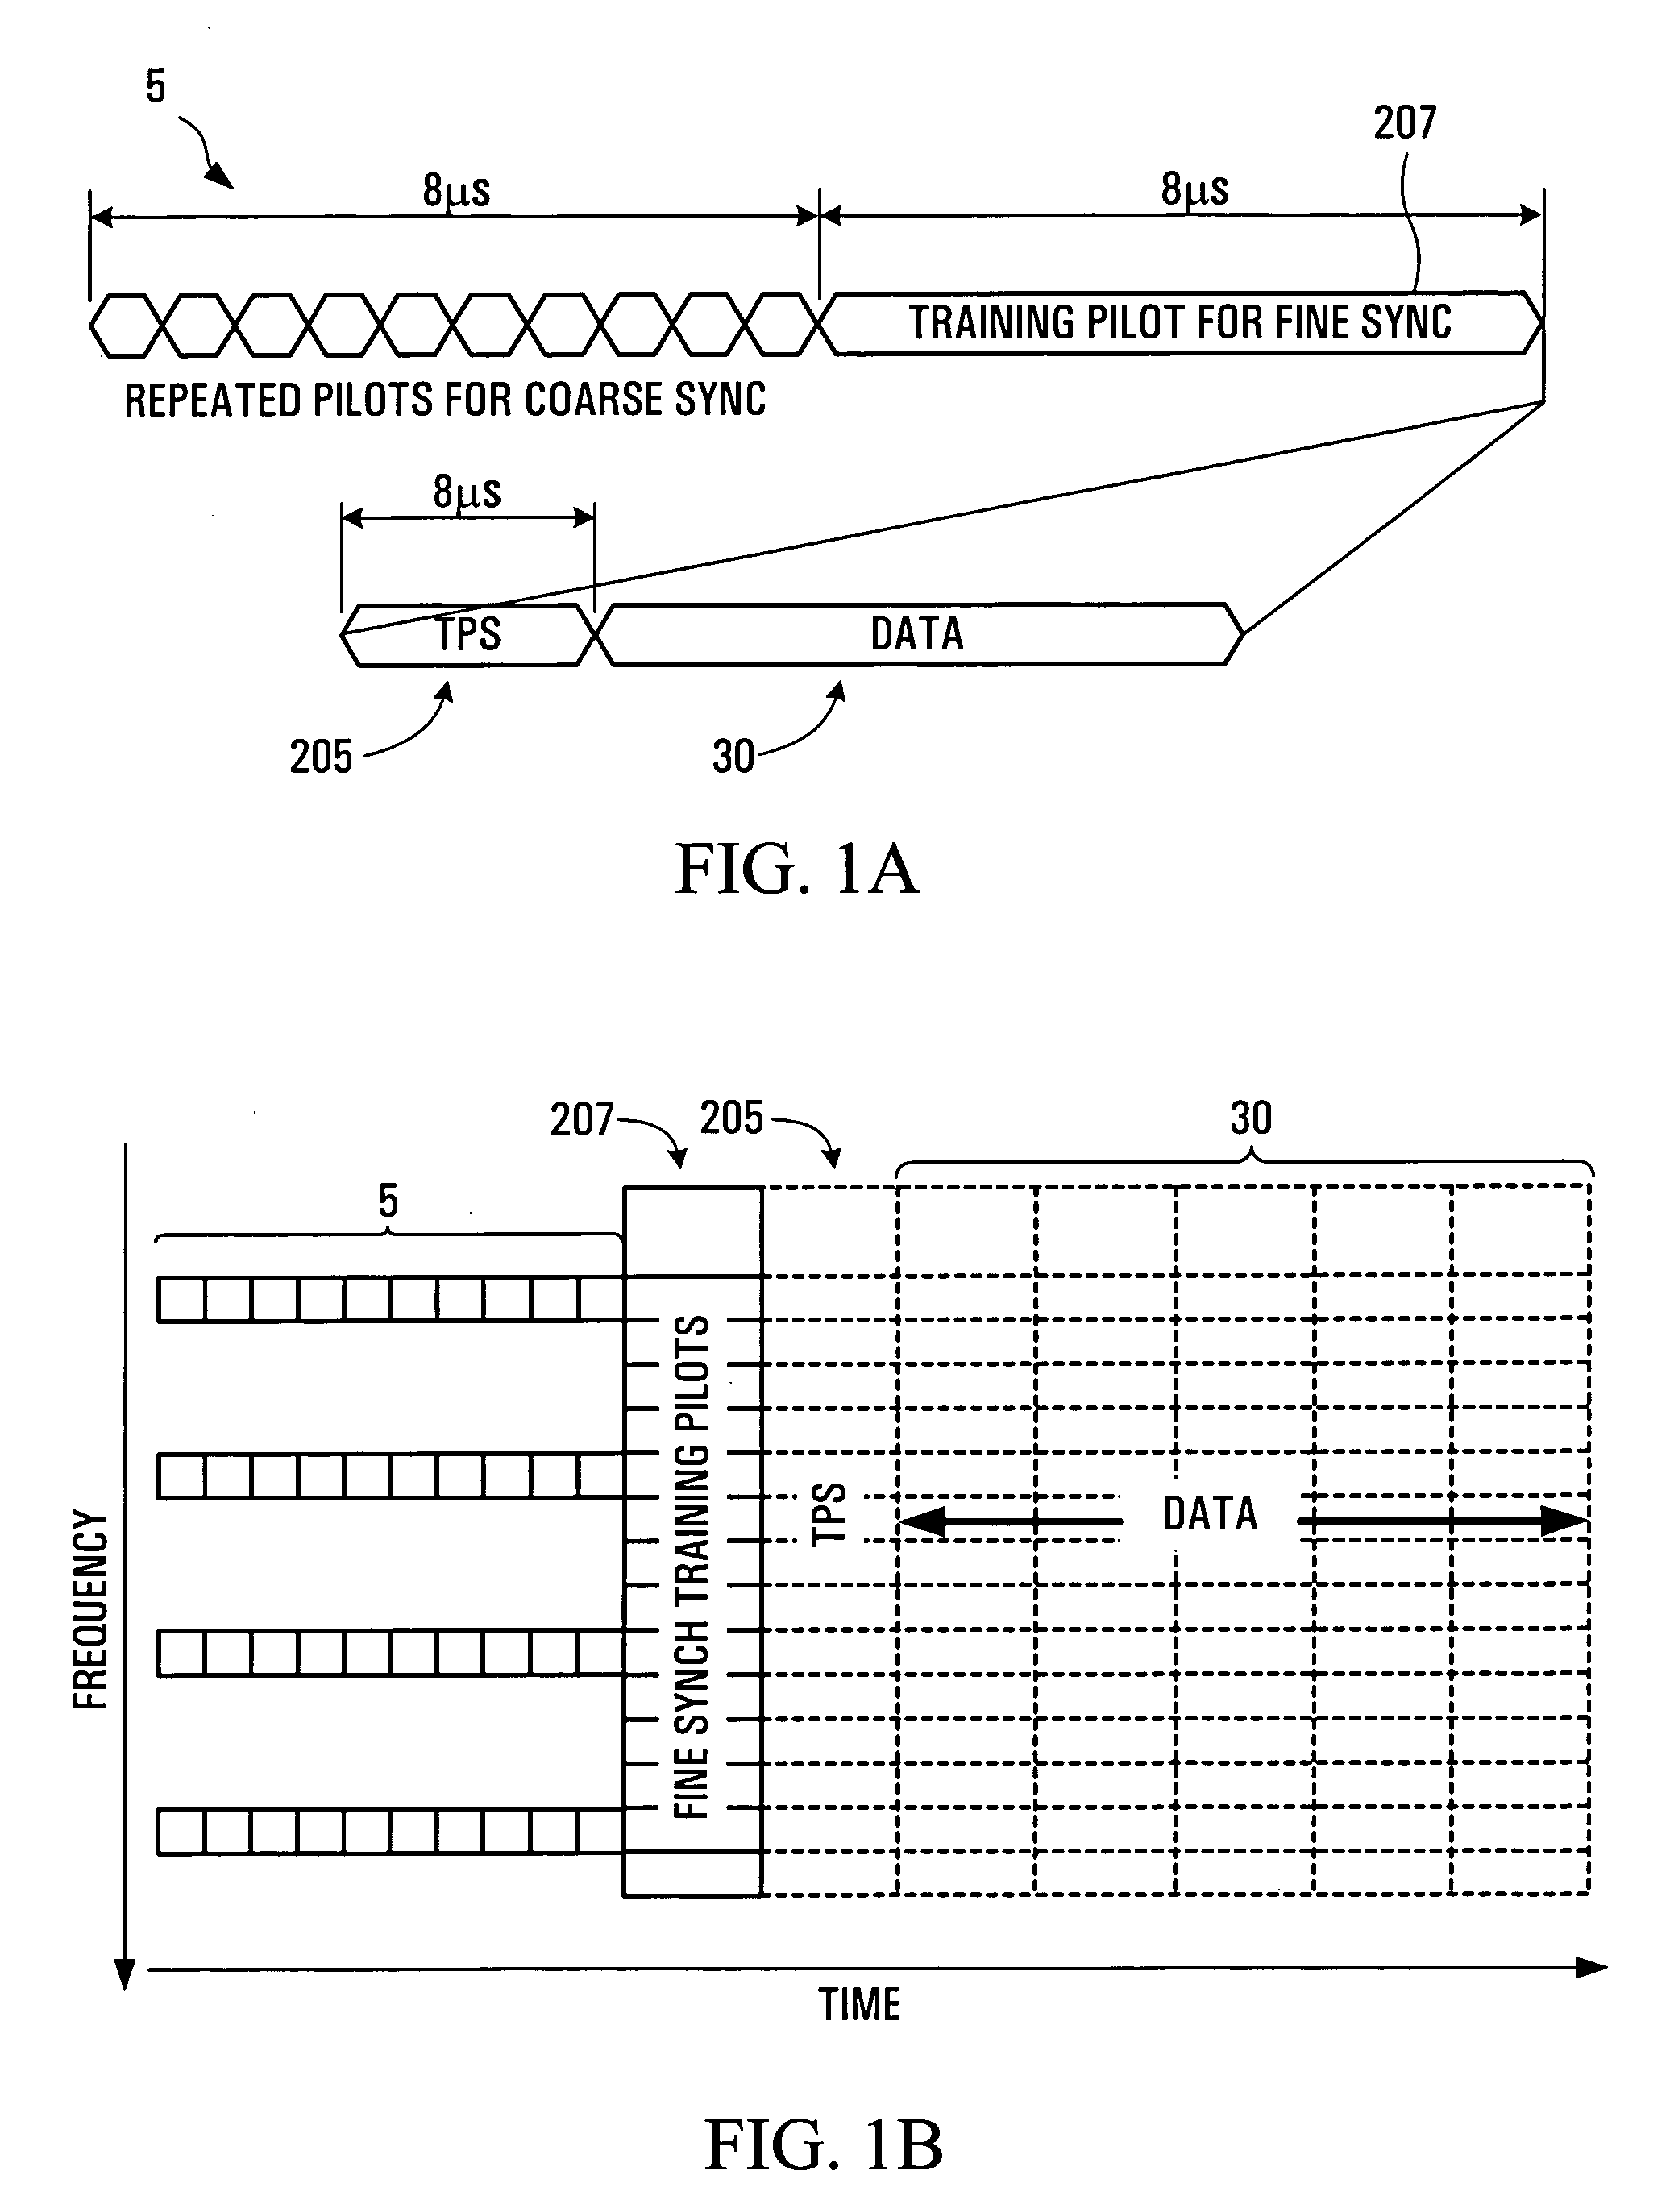 Method and system for performing synchronization in OFDM systems